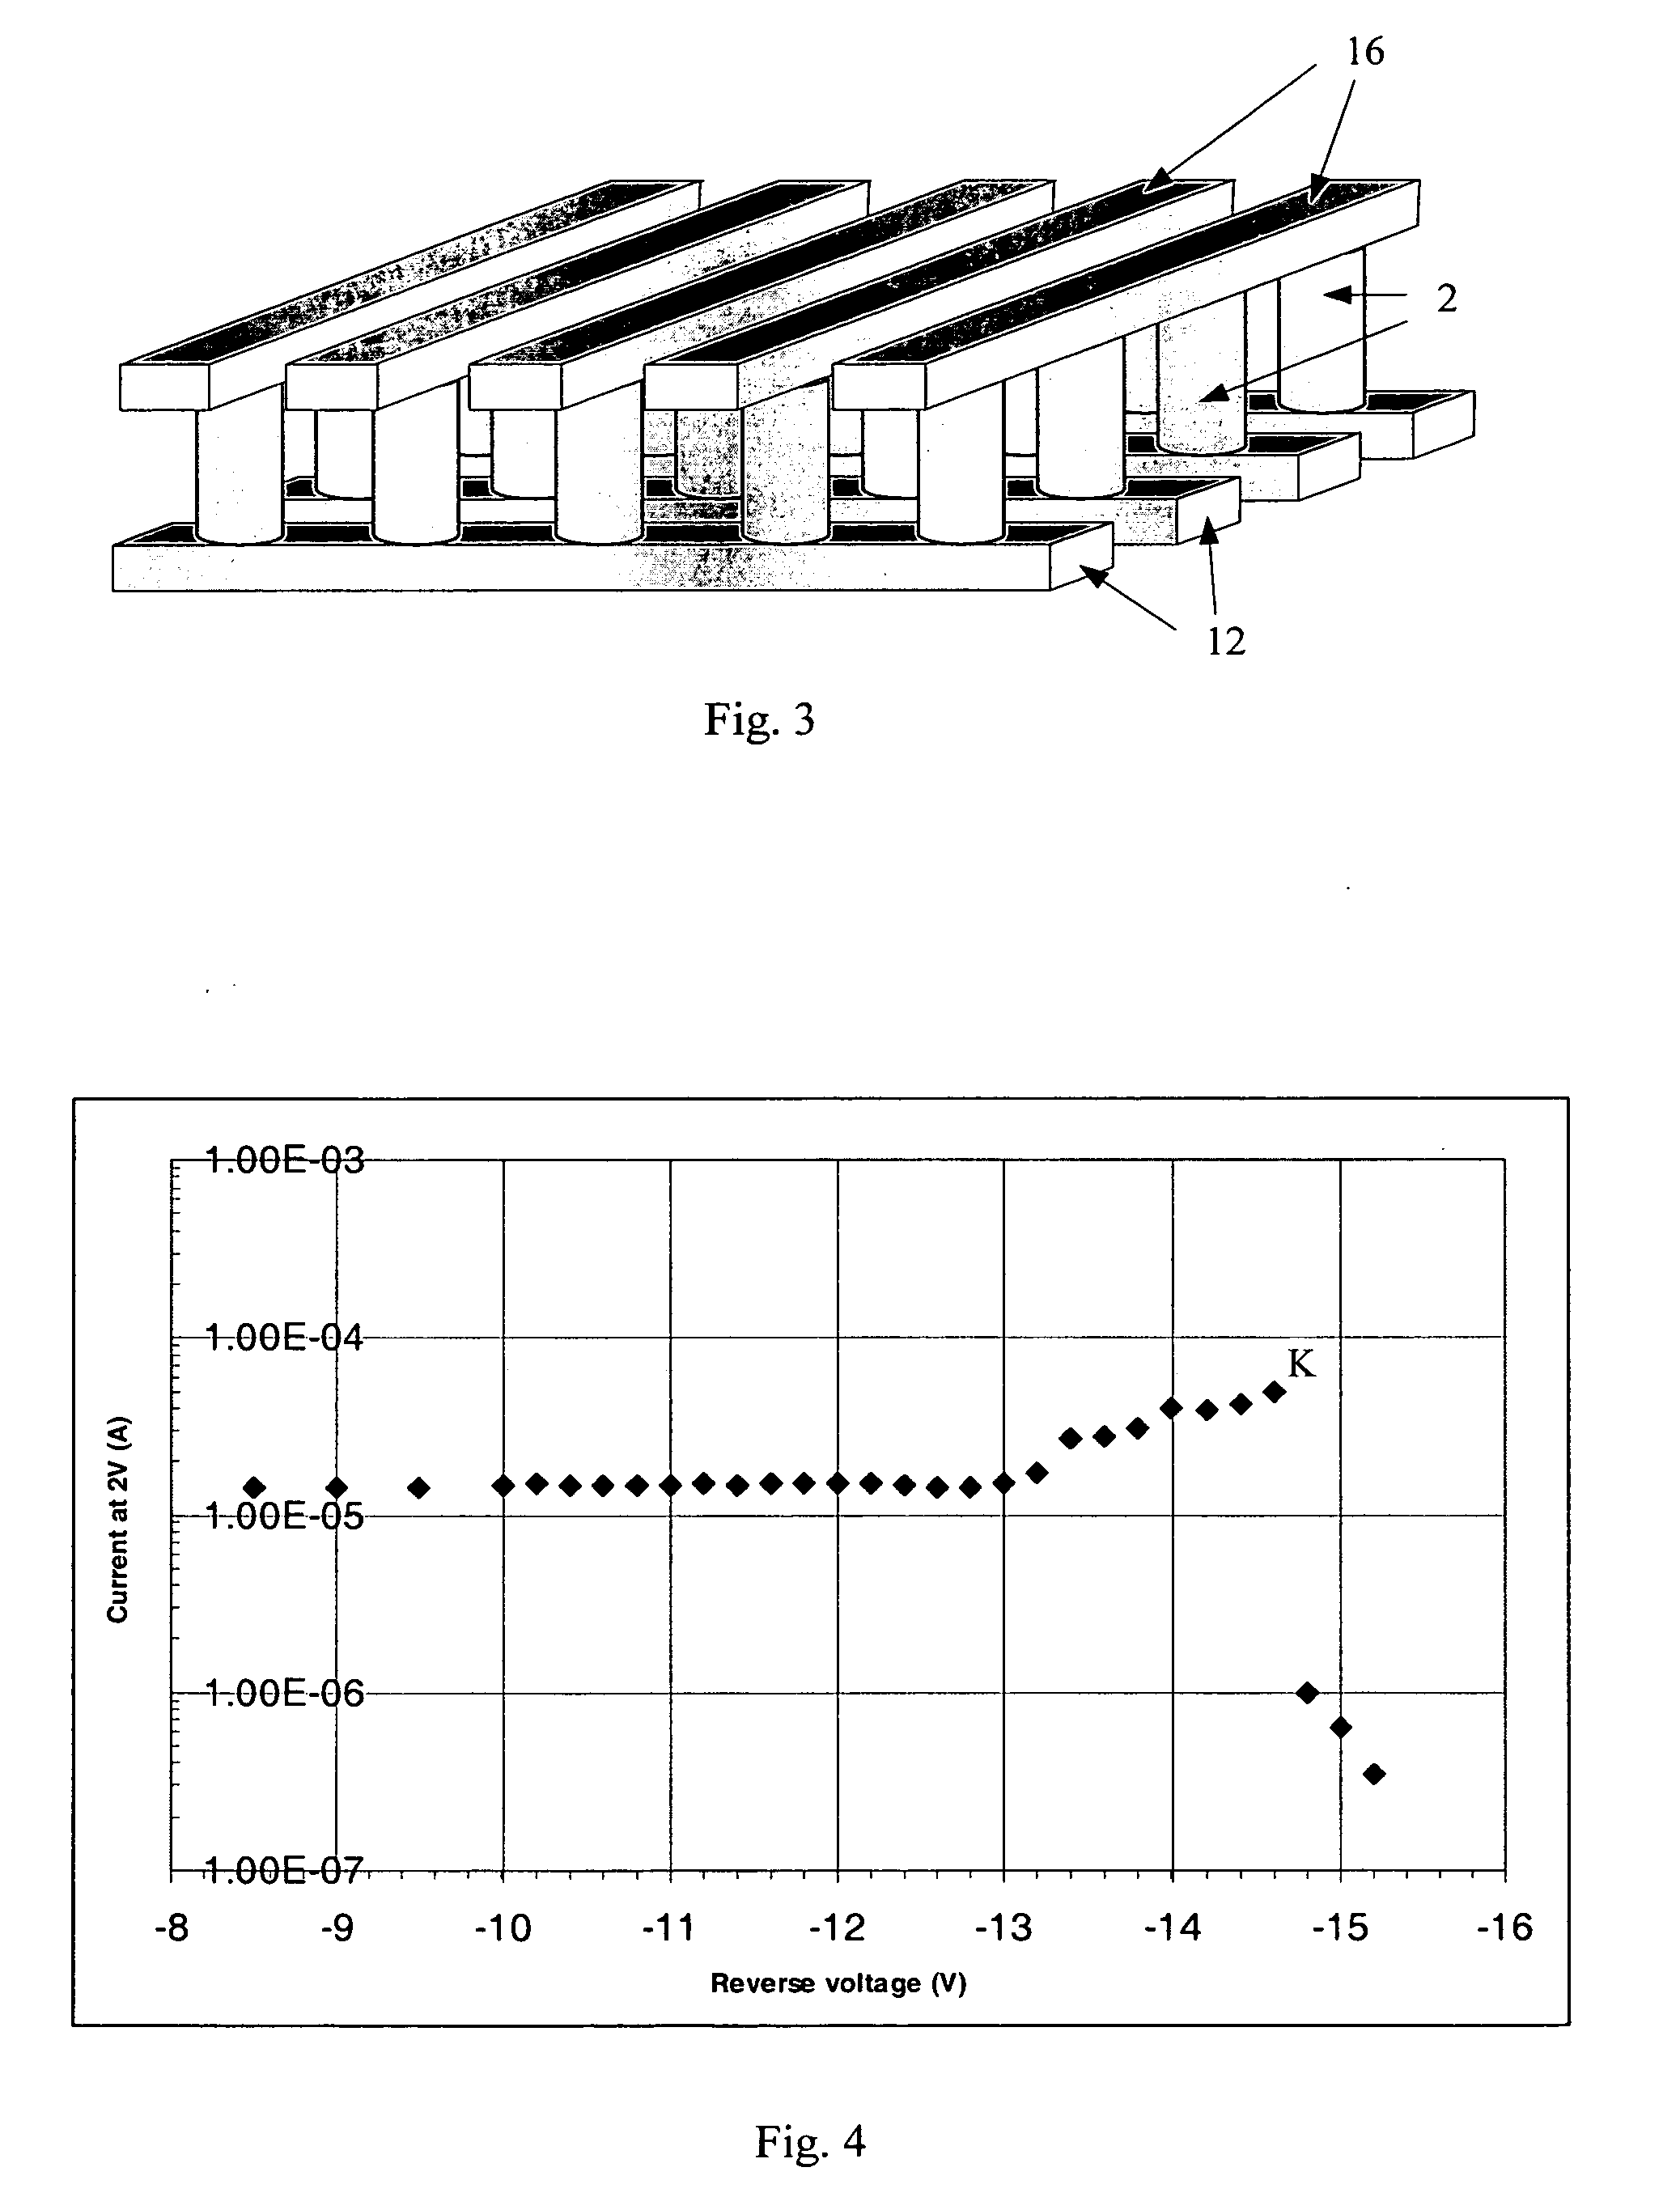 Method for using a memory cell comprising switchable semiconductor memory element with trimmable resistance